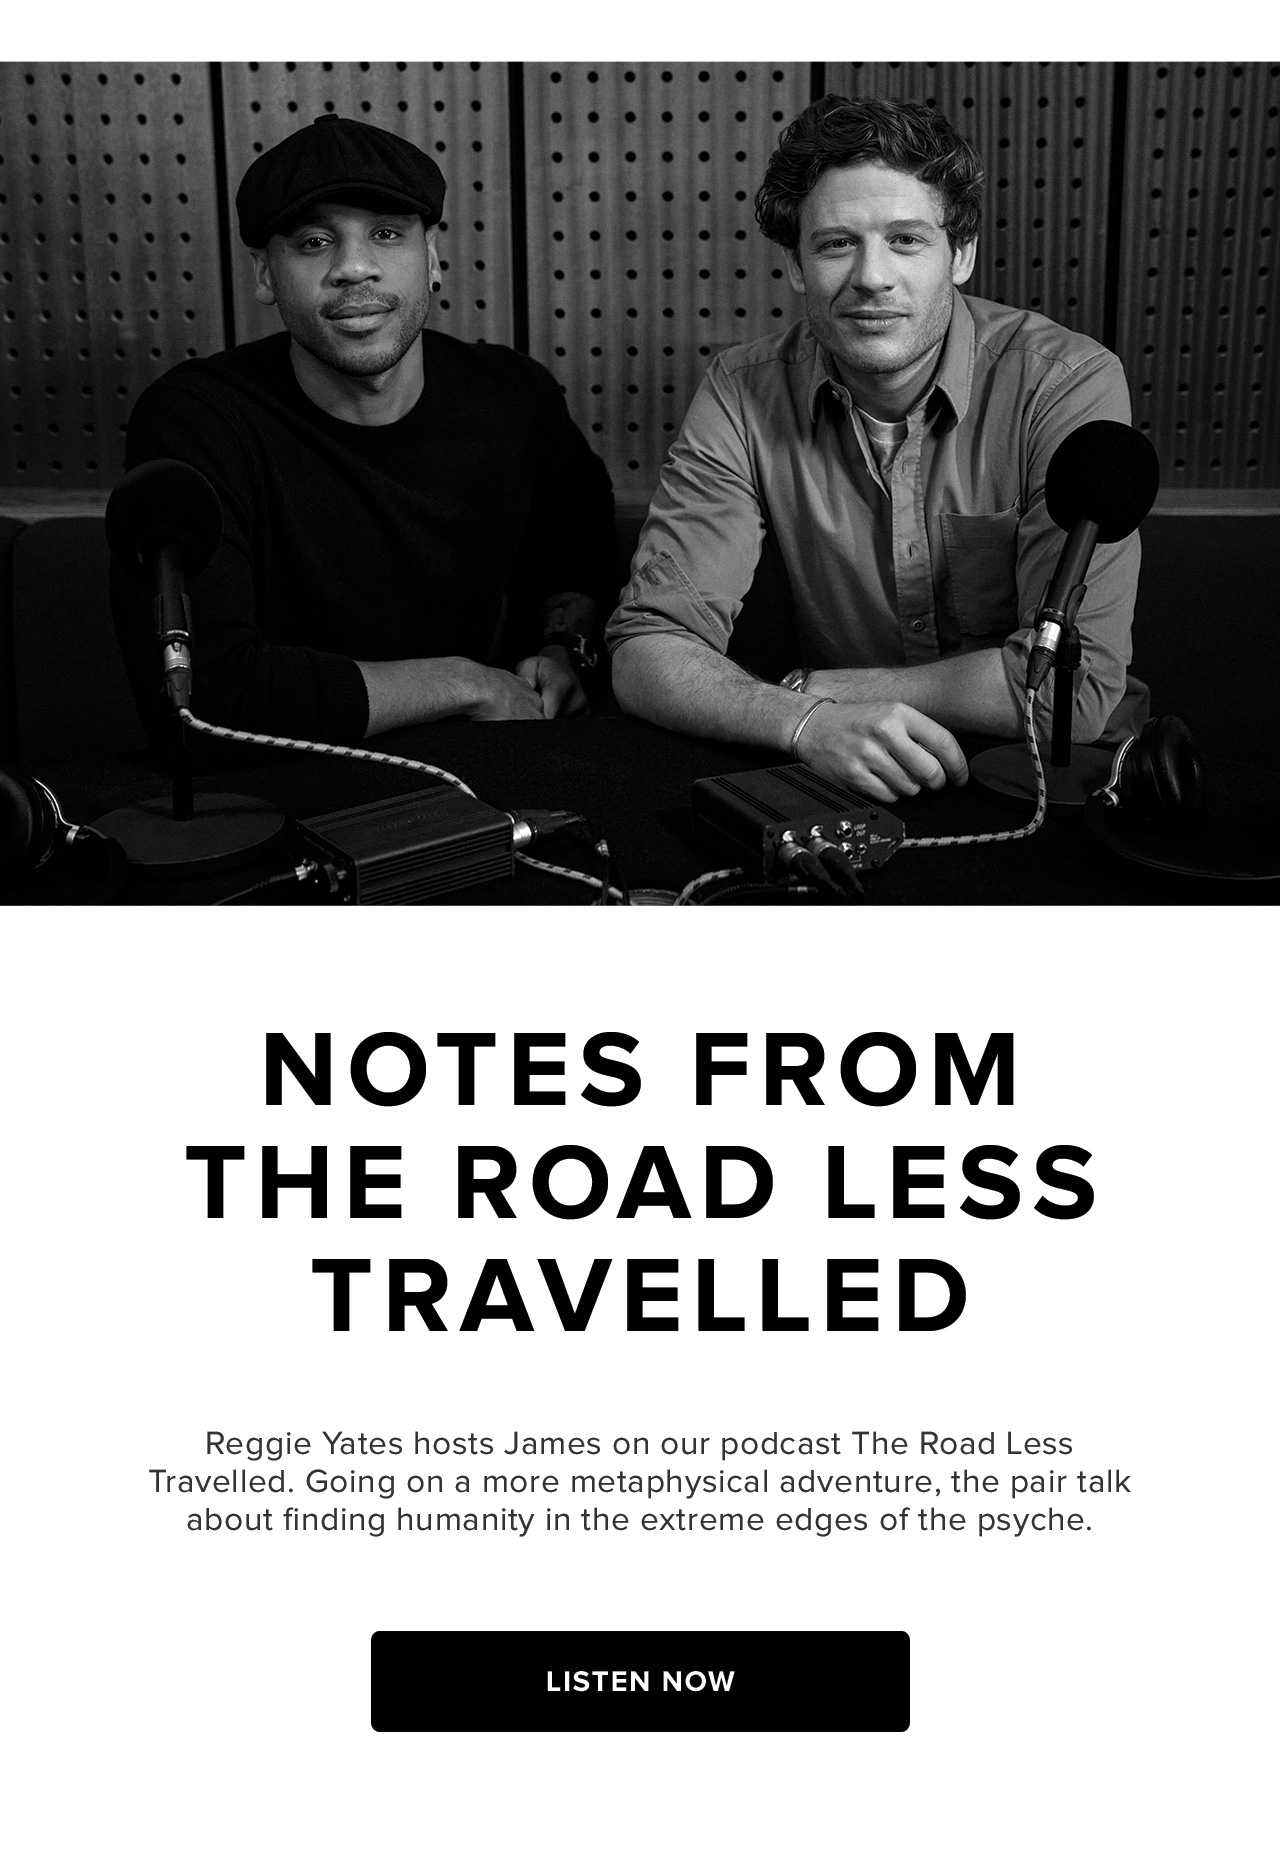 Reggie Yates hosts James on our podcast The Road Less Travelled. Going on a more metaphysical adventure, the pair talk about finding humanity in the extreme edges of the psyche.